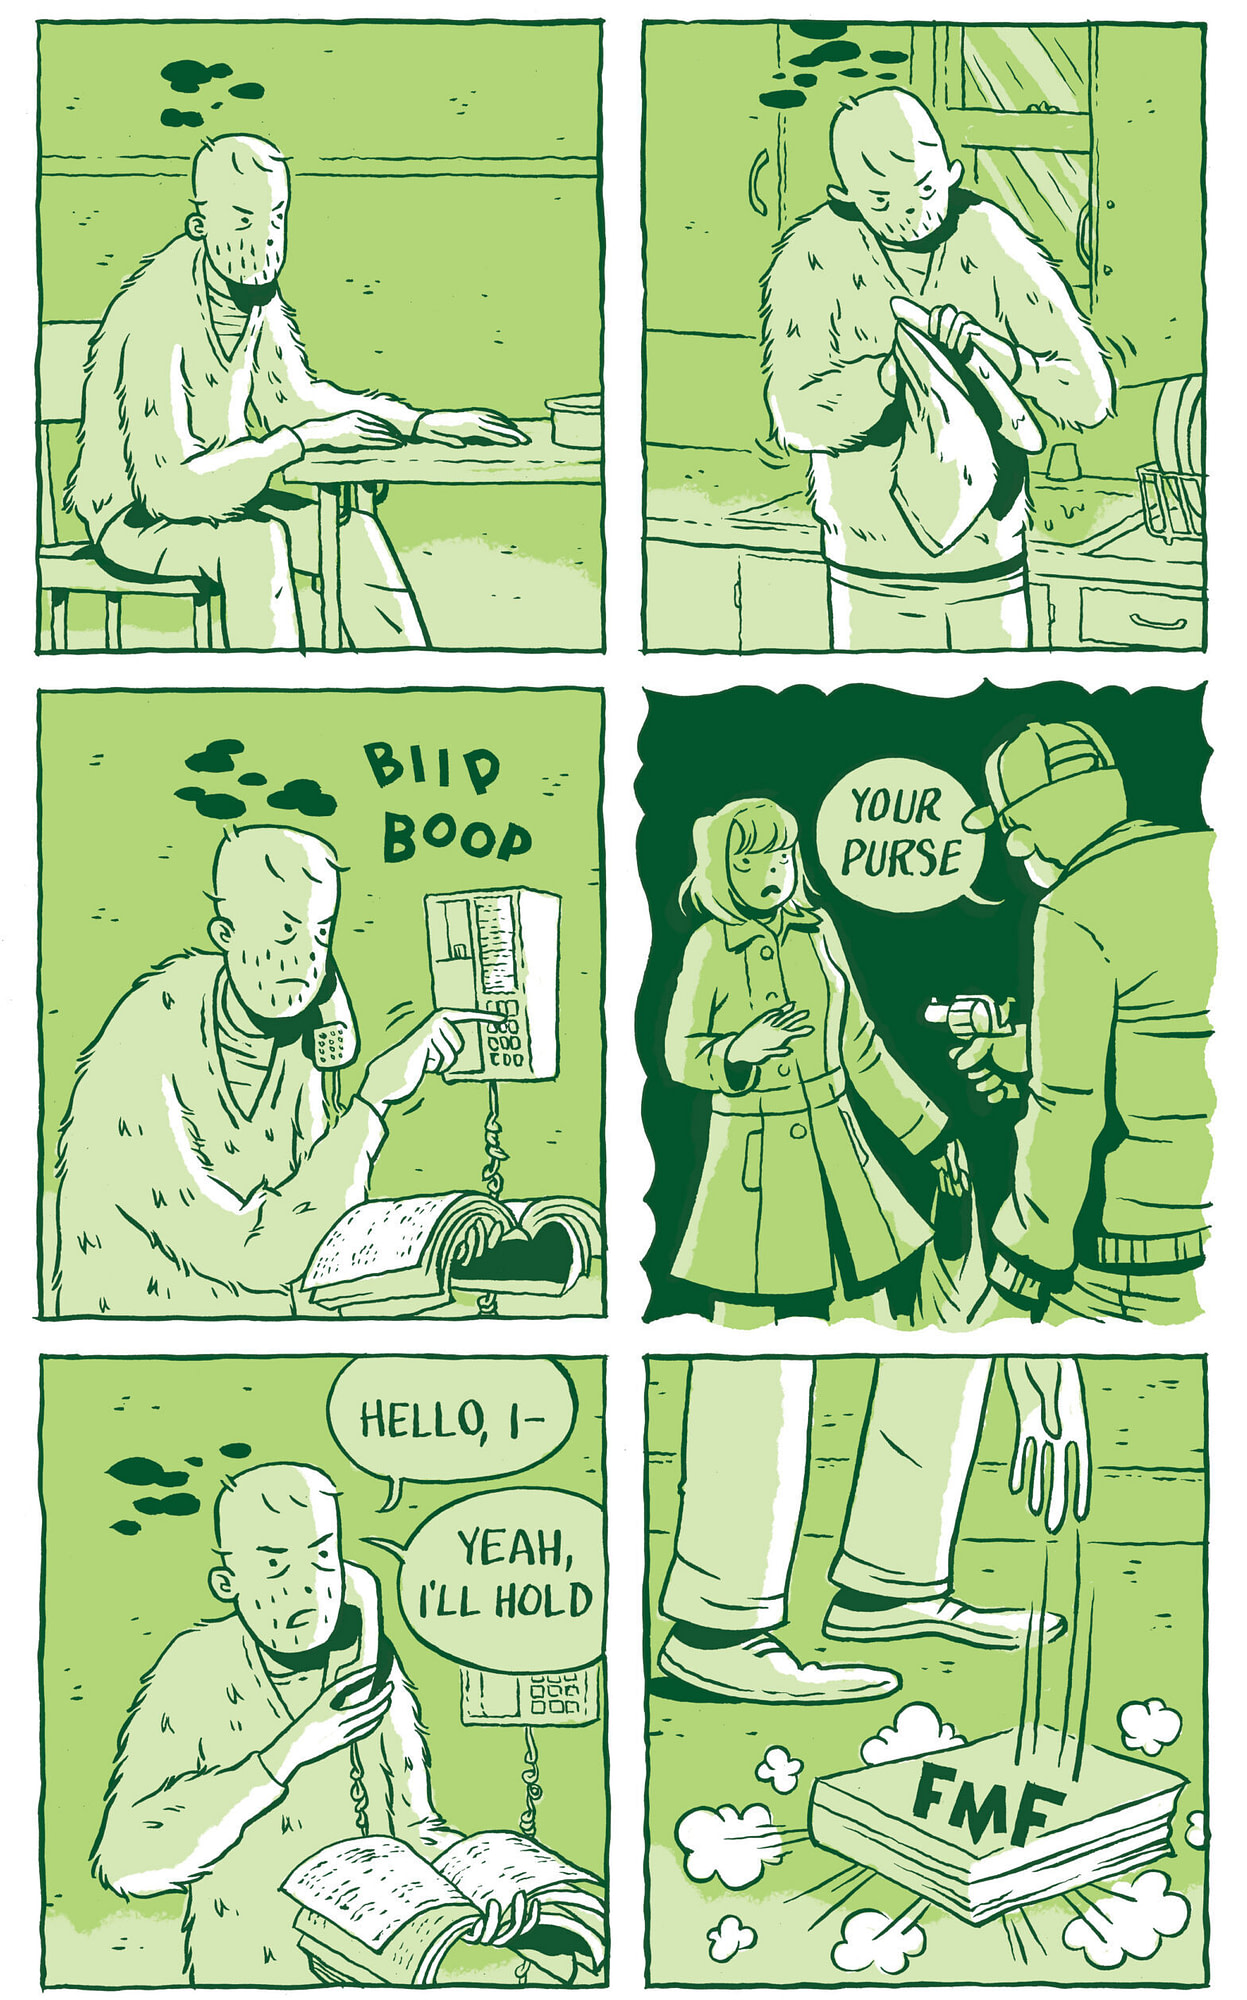 This comic is drawn mostly in greens, with lighter green backgrounds and darker green lines. There are two main characters, a man and a woman. In the first panel, the ban sits at a table looking worried. His shoulders are slumped and he has small clouds floating above his head, indicating concern. He wears a fuzzy v-neck sweater and long pants.   [Panel 2]  The man, still worried and with clouds above his head, scrubs a plate near the sink in his kitchen. He looks at the plate with a little too much attention, like he’s trying to focus on cleaning instead of his anxious feelings.   [Panel 3] The man, still worried, makes a call on a landline phone that hangs on the wall. He has a large phone book open in front of him and the phone makes “biip boop” sounds as he punches in the numbers.   [Panel 4]  The border of this frame is a sort of quasi-scalloped shape, indicating that the action occurs away from the man at home worrying by himself. These frames recur throughout the comic to contain moments from other times and spaces, including memories, fantasies, scenes from the future, and encounters that the man wasn’t present for. In this panel, a figure points a gun at a woman. She has chin-length hair and bangs and wears a long winter coat. She has a bag in on hand and the holds the other out in front of her, startled. The figure says “Your purse” to the woman, trying to mug her.   Panel 5 Back at home, the man is on the phone with someone. He is still holding the phone book in front of him. “Hello, I—” He says into the receiver. “Yeah, I’ll hold.”   [Panel 6] The man throws the phone book down in frustration. It stirs up a little dust and makes a “Fmf” sound as it hits the floor. 